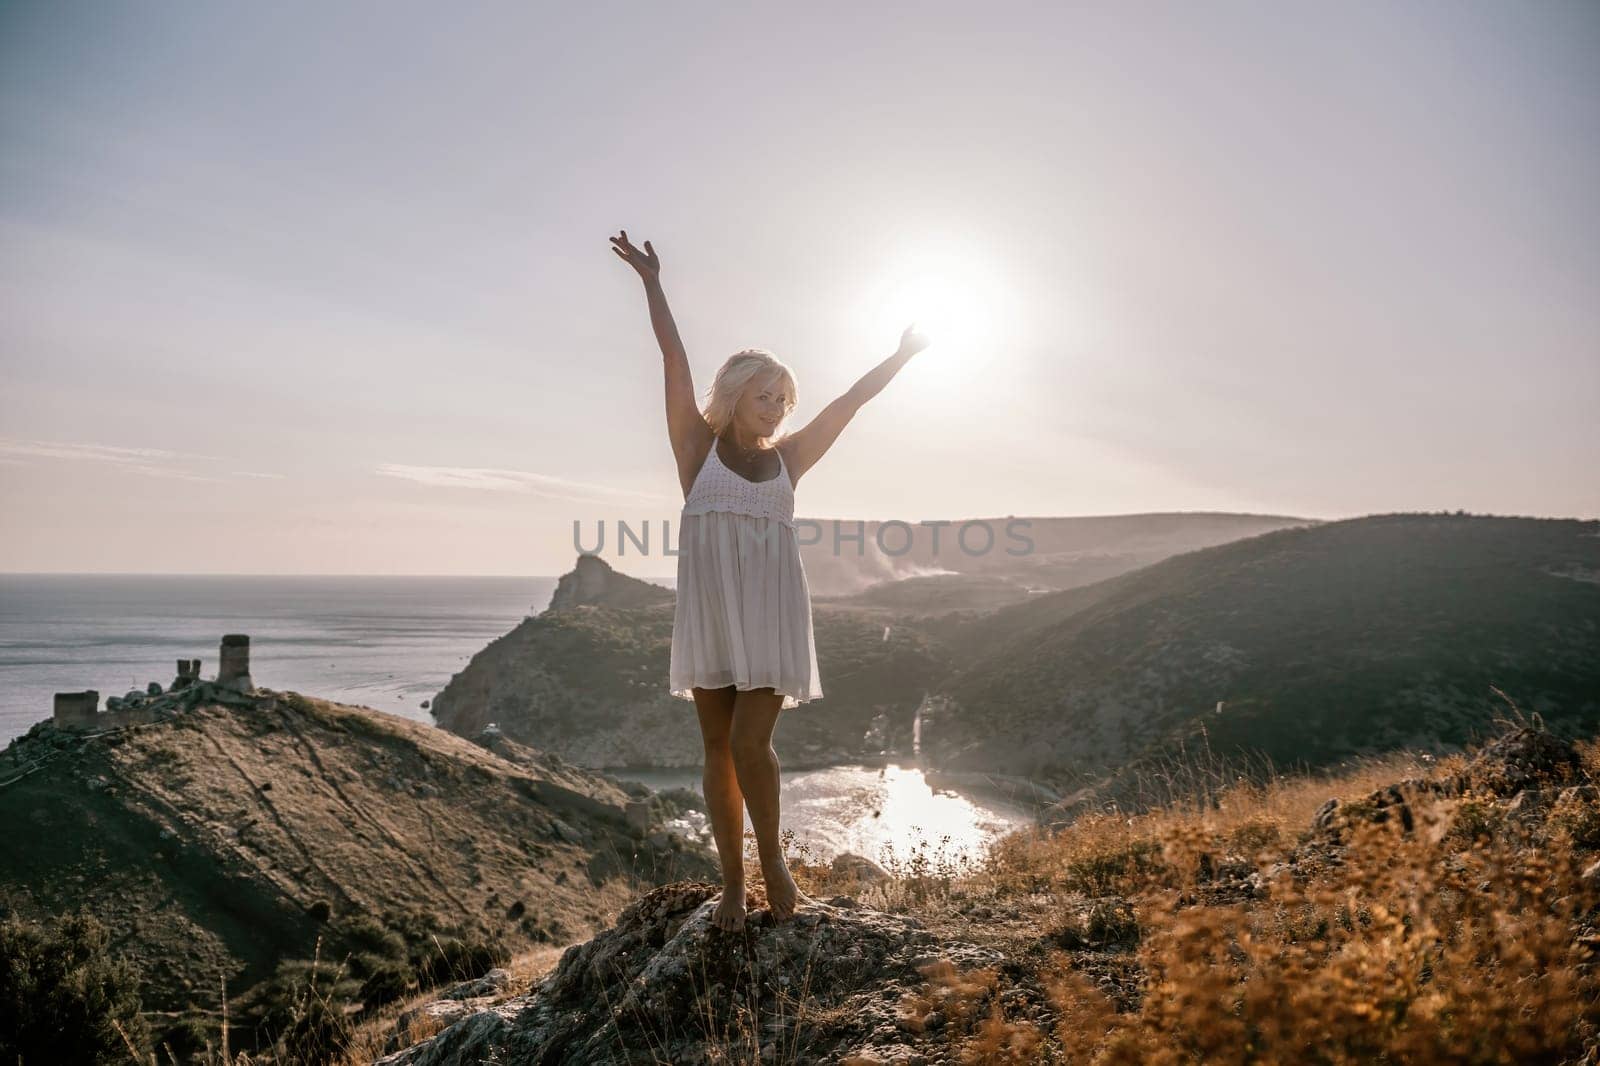 woman standing hill with her arms raised in the air, looking up at the sun. The scene is peaceful and serene, with the woman's expression conveying a sense of joy and happiness